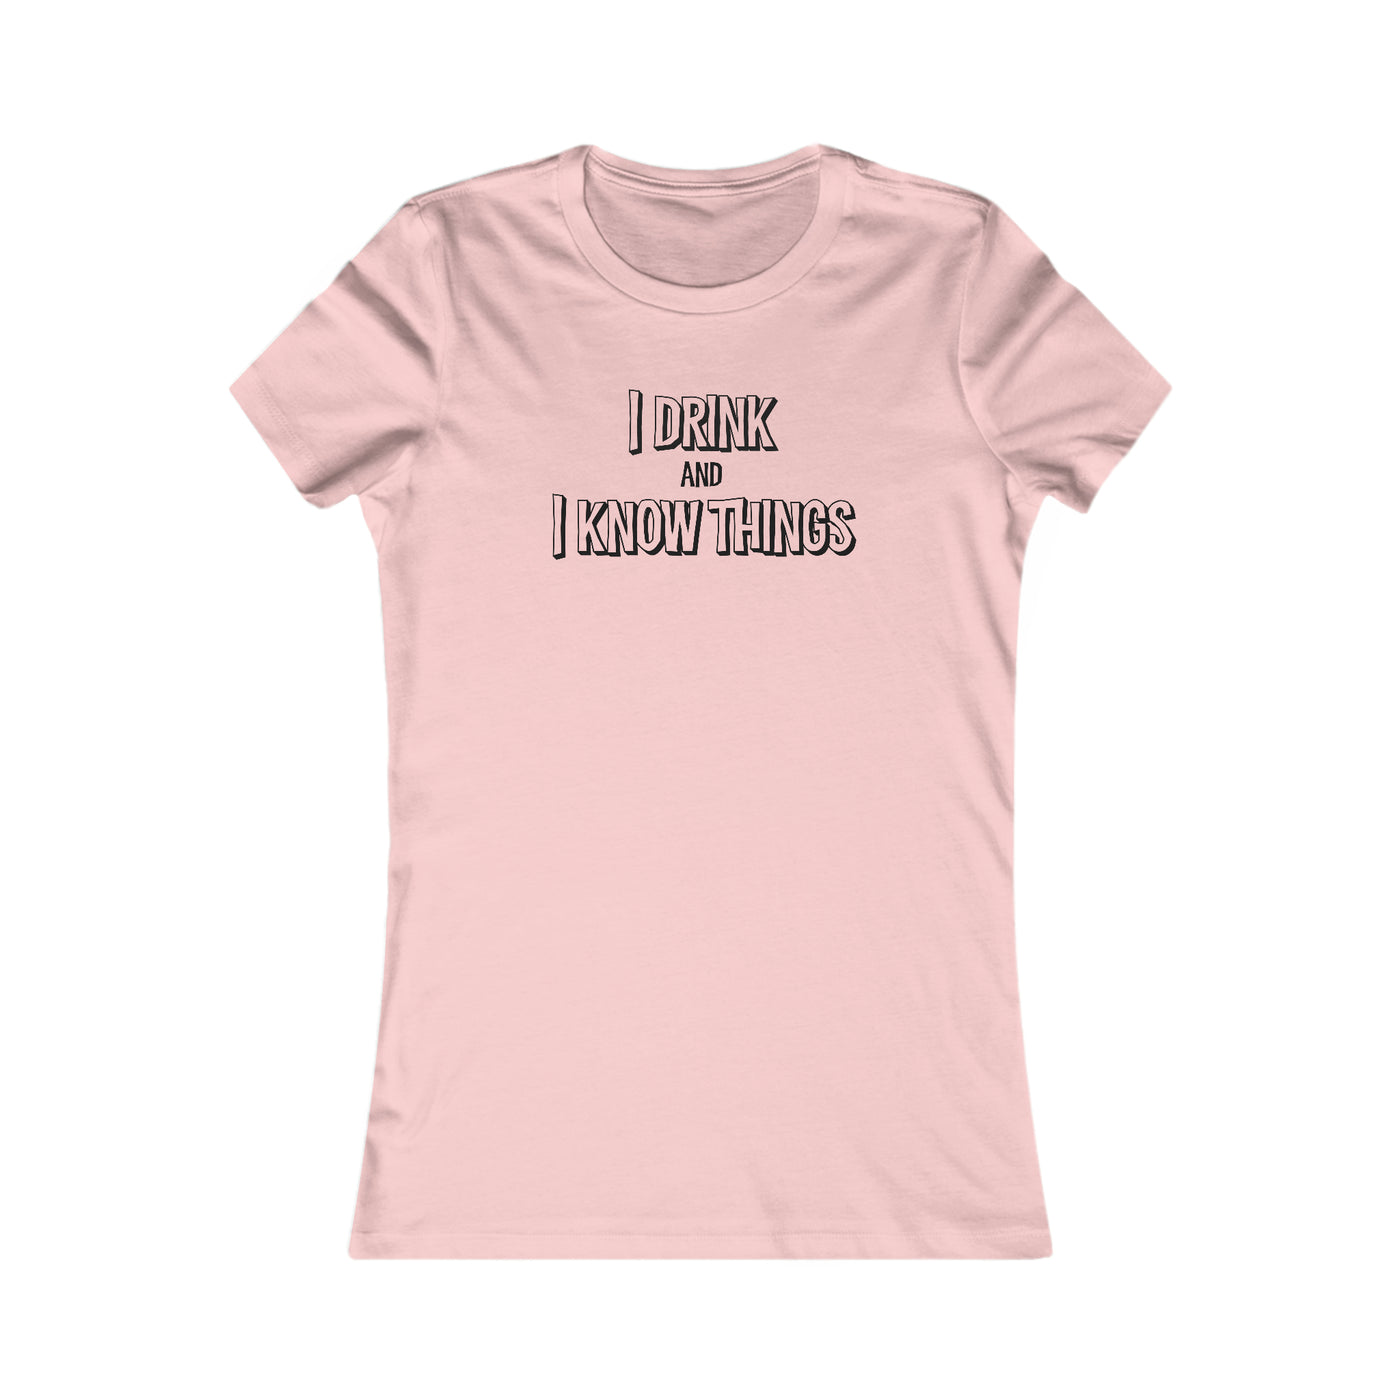 I Drink And I Know Things Women's Favorite Tee